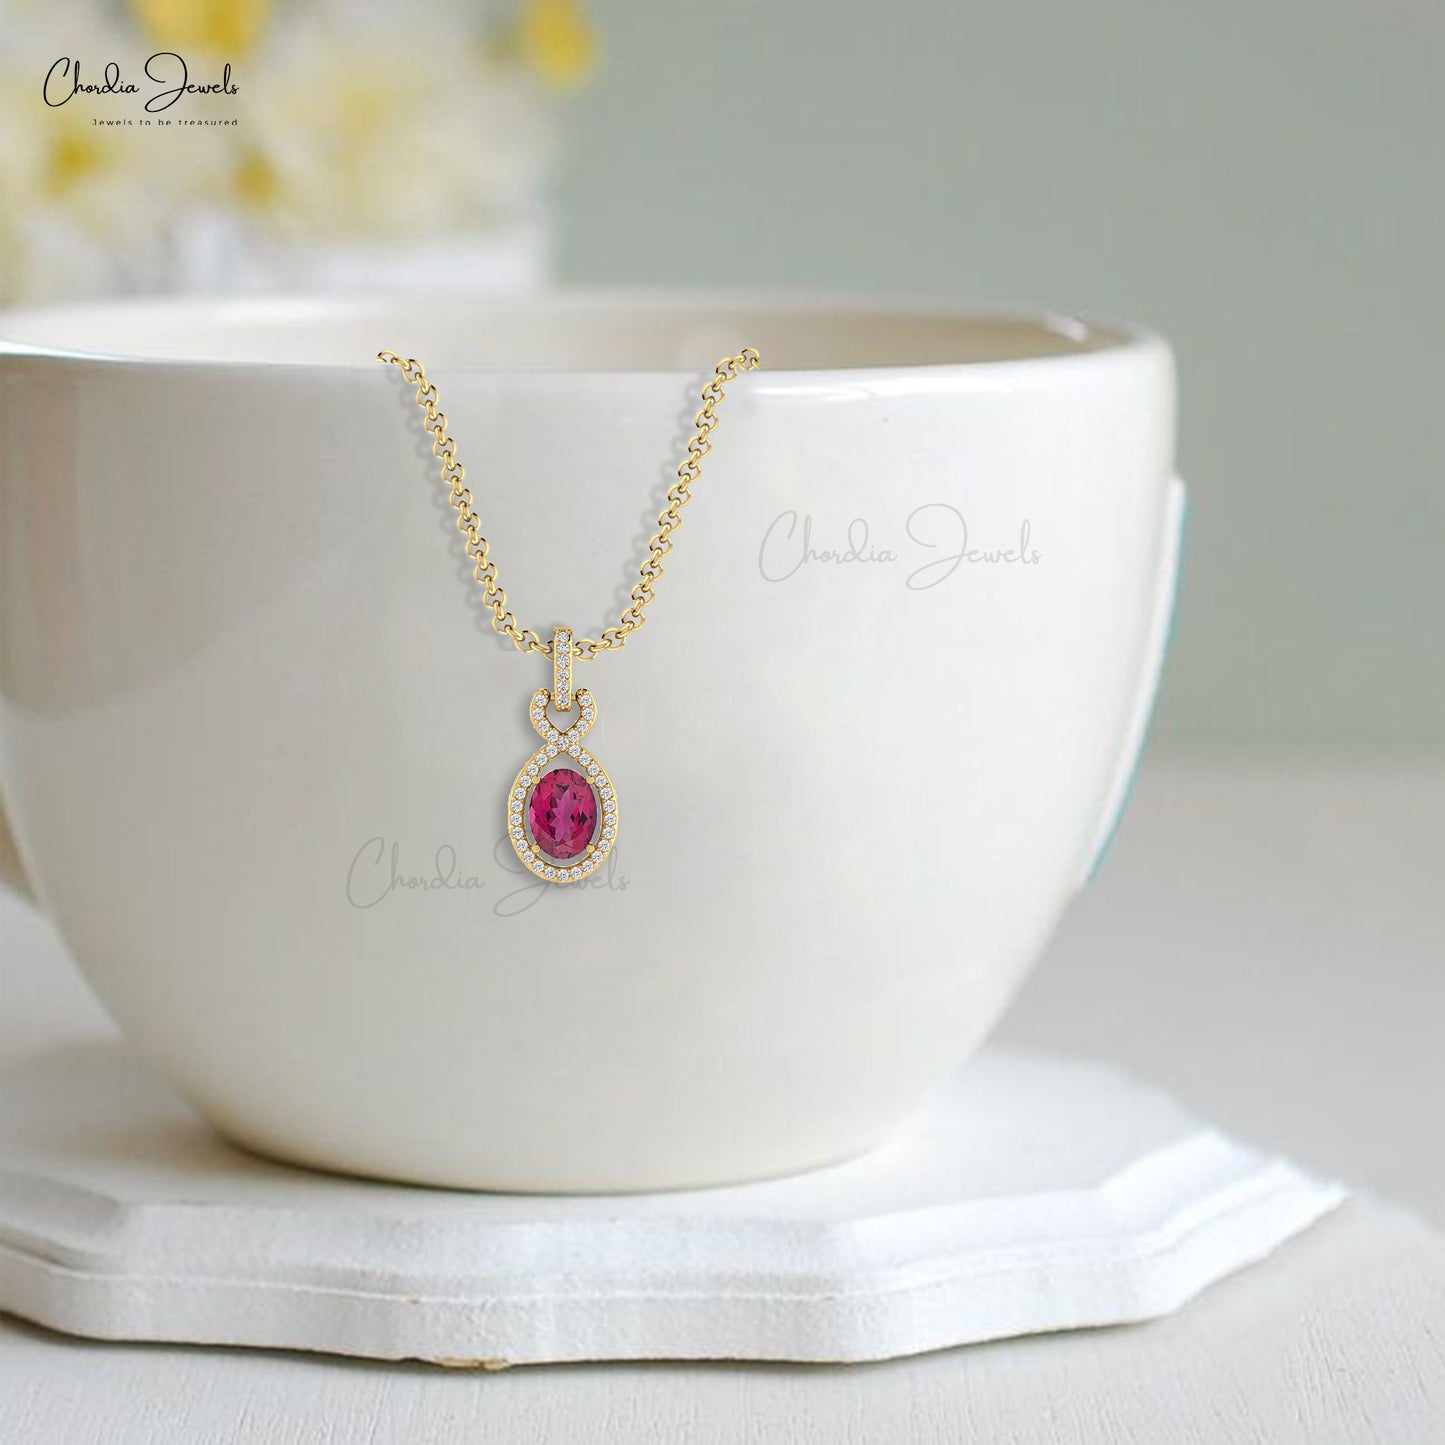 Natural Pink Tourmaline Halo Pendant With Bail 14k Solid Gold Diamond Pendant 7x5mm Oval Cut Gemstone Pendant For October Birthstone